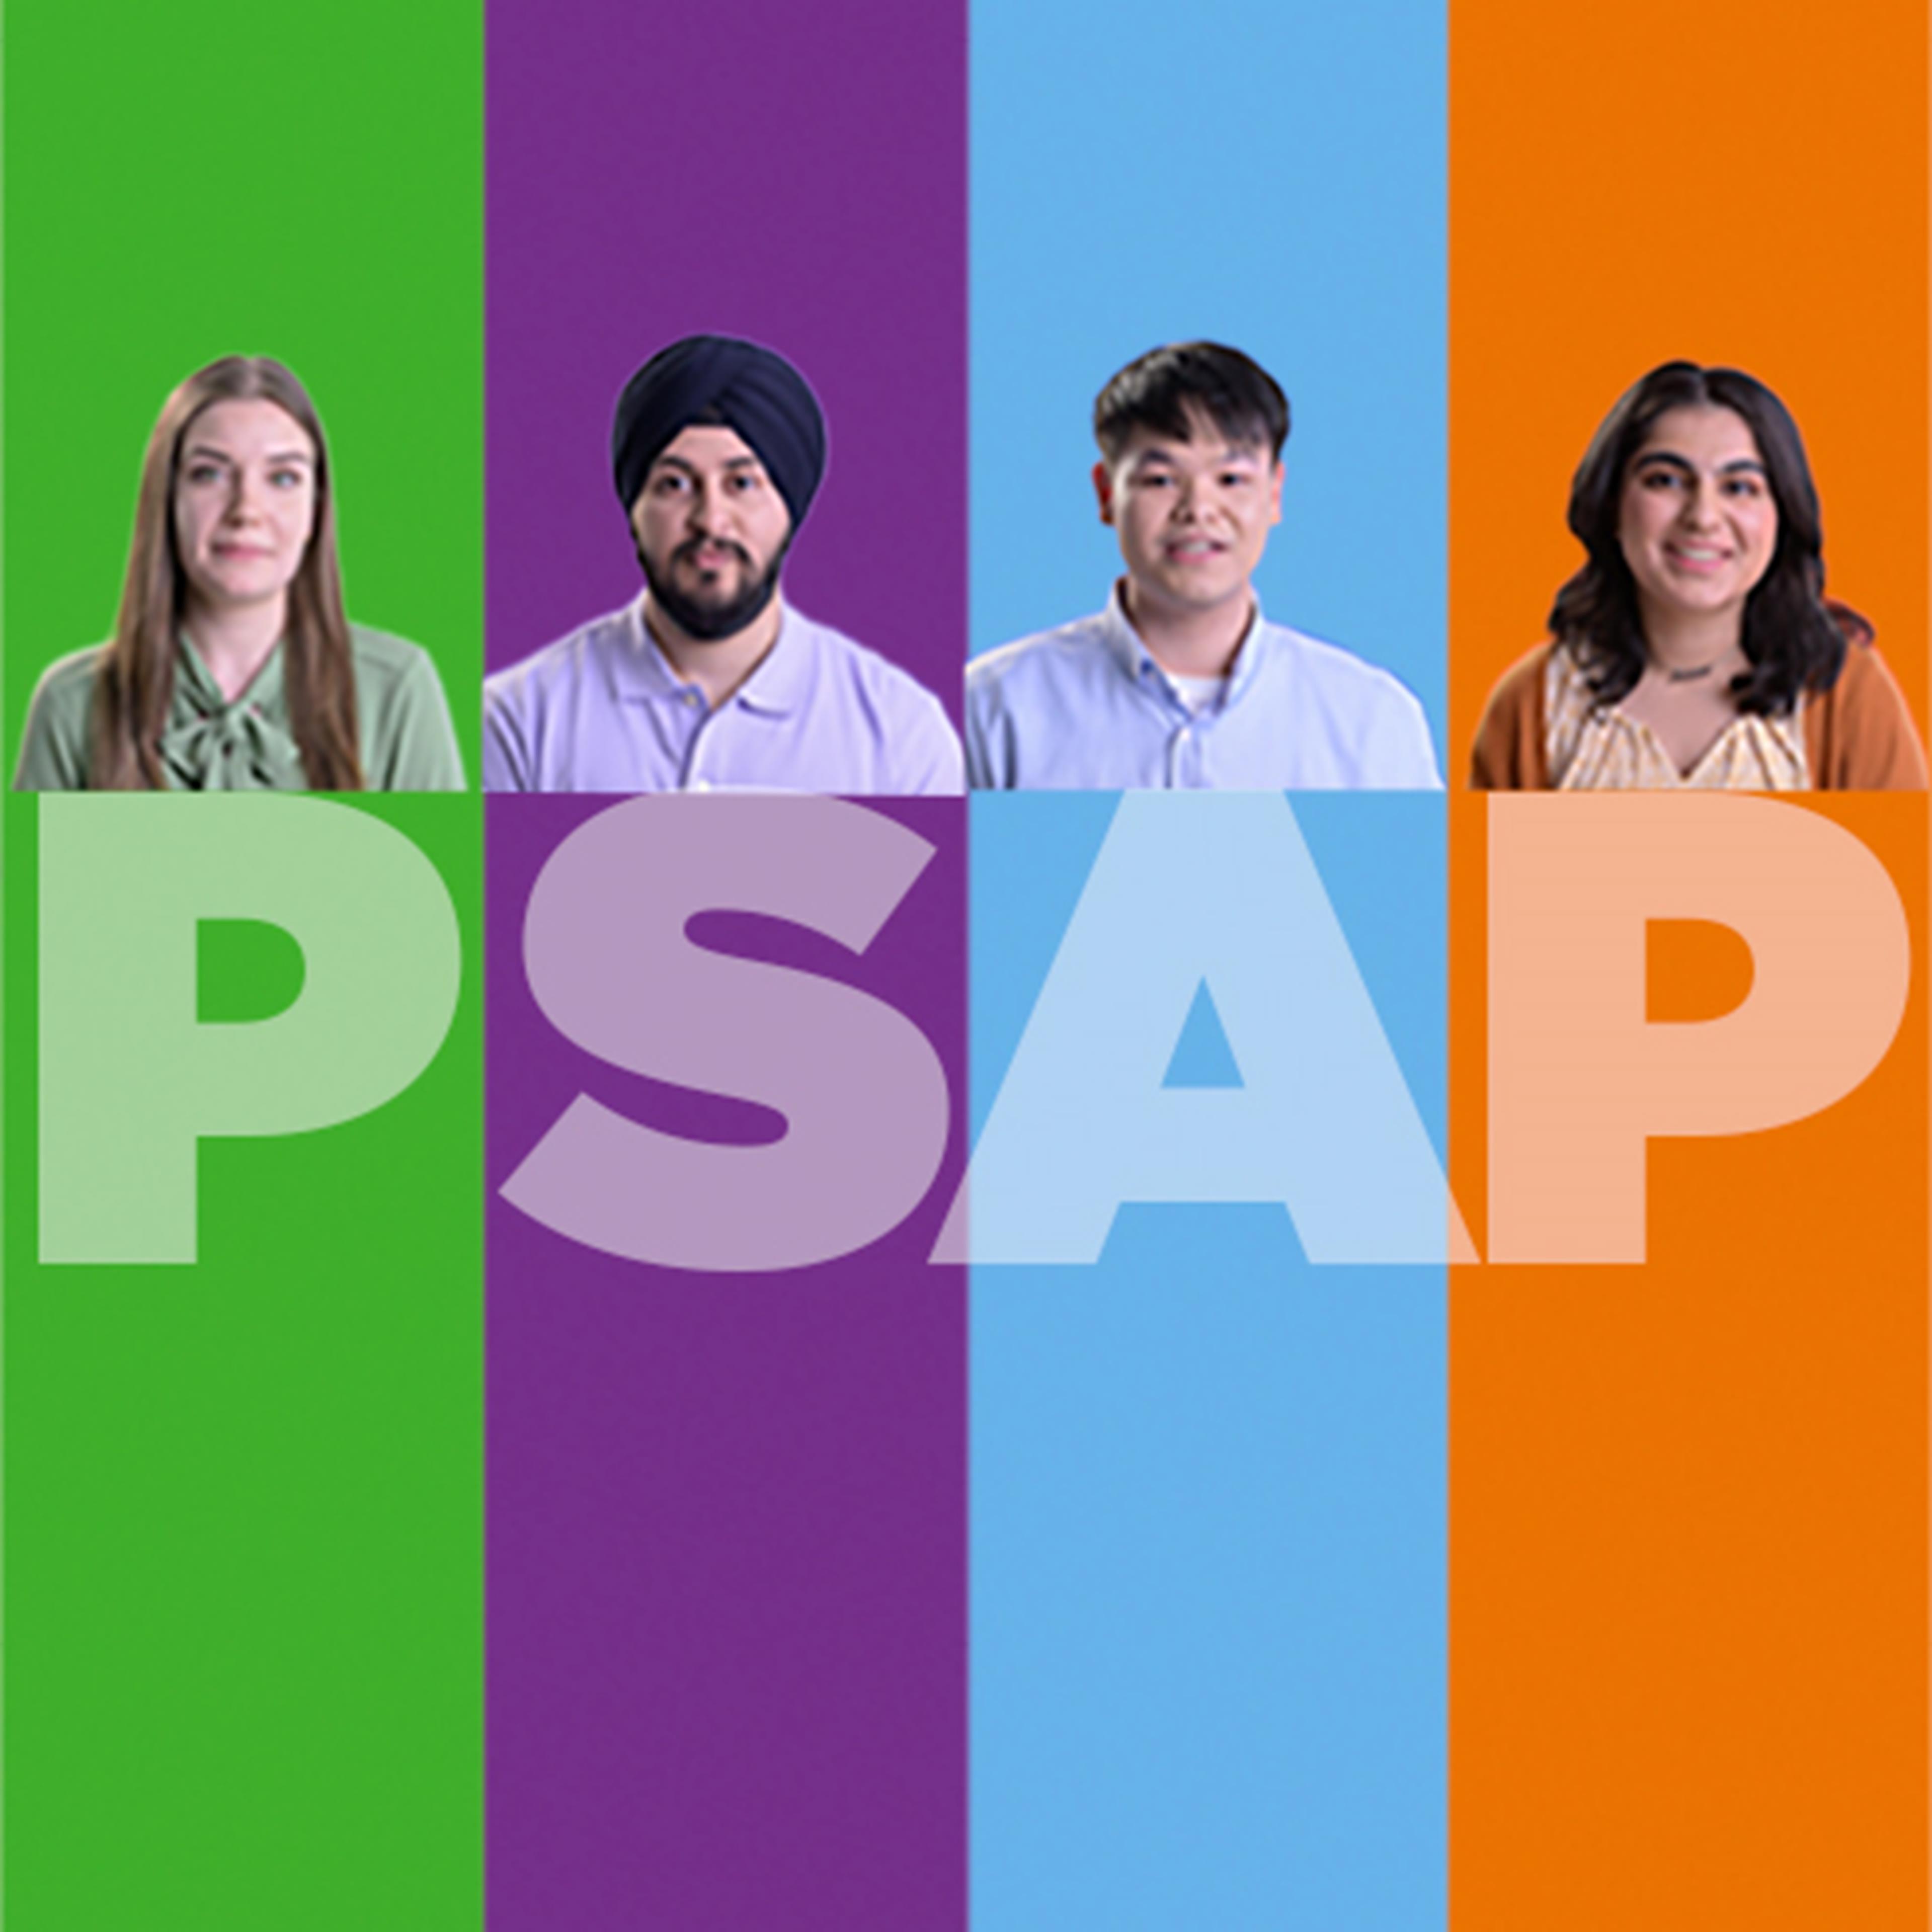 Four people looking at camera and smiling atop PSAP